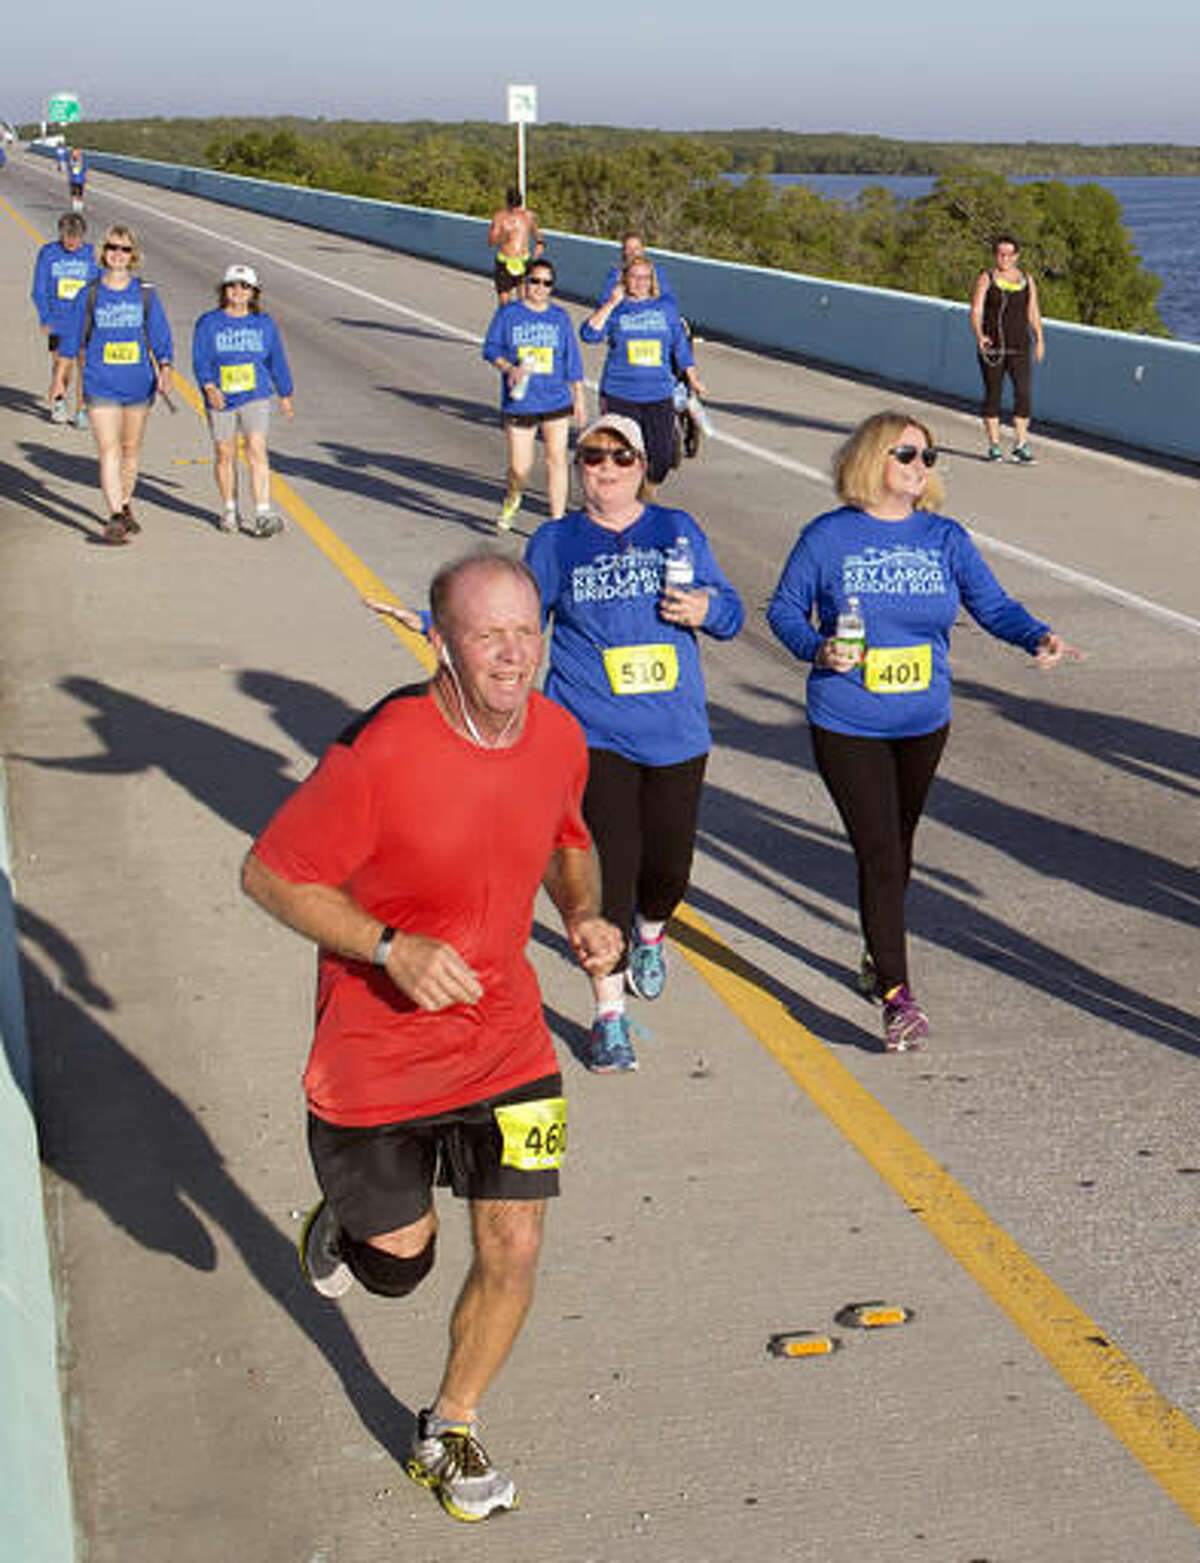 In this photo provided by the Florida Keys News Bureau, competitors in the 5k division of the Key Largo Bridge Run head to the finish line Saturday, Nov. 12, 2016. Some 465 registered entrants competed in 5k, 10k and half-marathon classes that took participants out and back over the 1.4-mile-long Jewfish Creek Bridge and land areas. (Bob Care/Florida Keys News Bureau via AP )